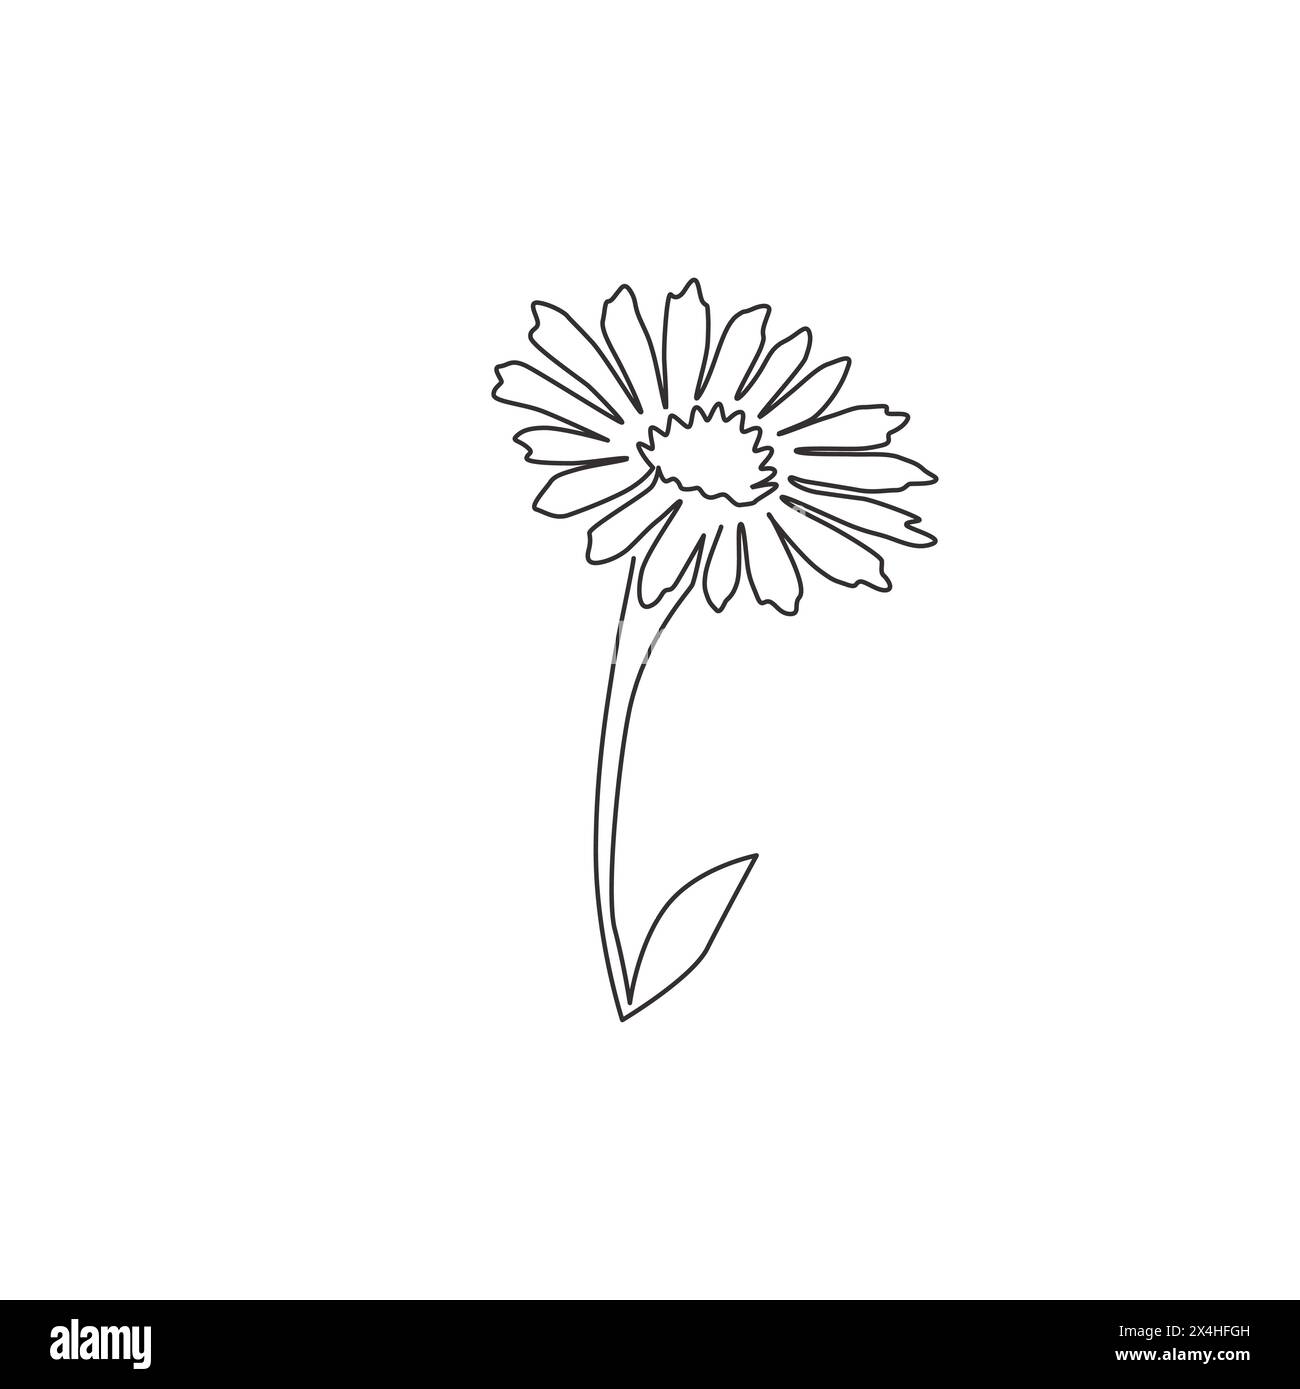 Single continuous line drawing of beauty fresh bellis perennis for home wall decor poster art. Printable decorative common daisy flower concept. Moder Stock Vector